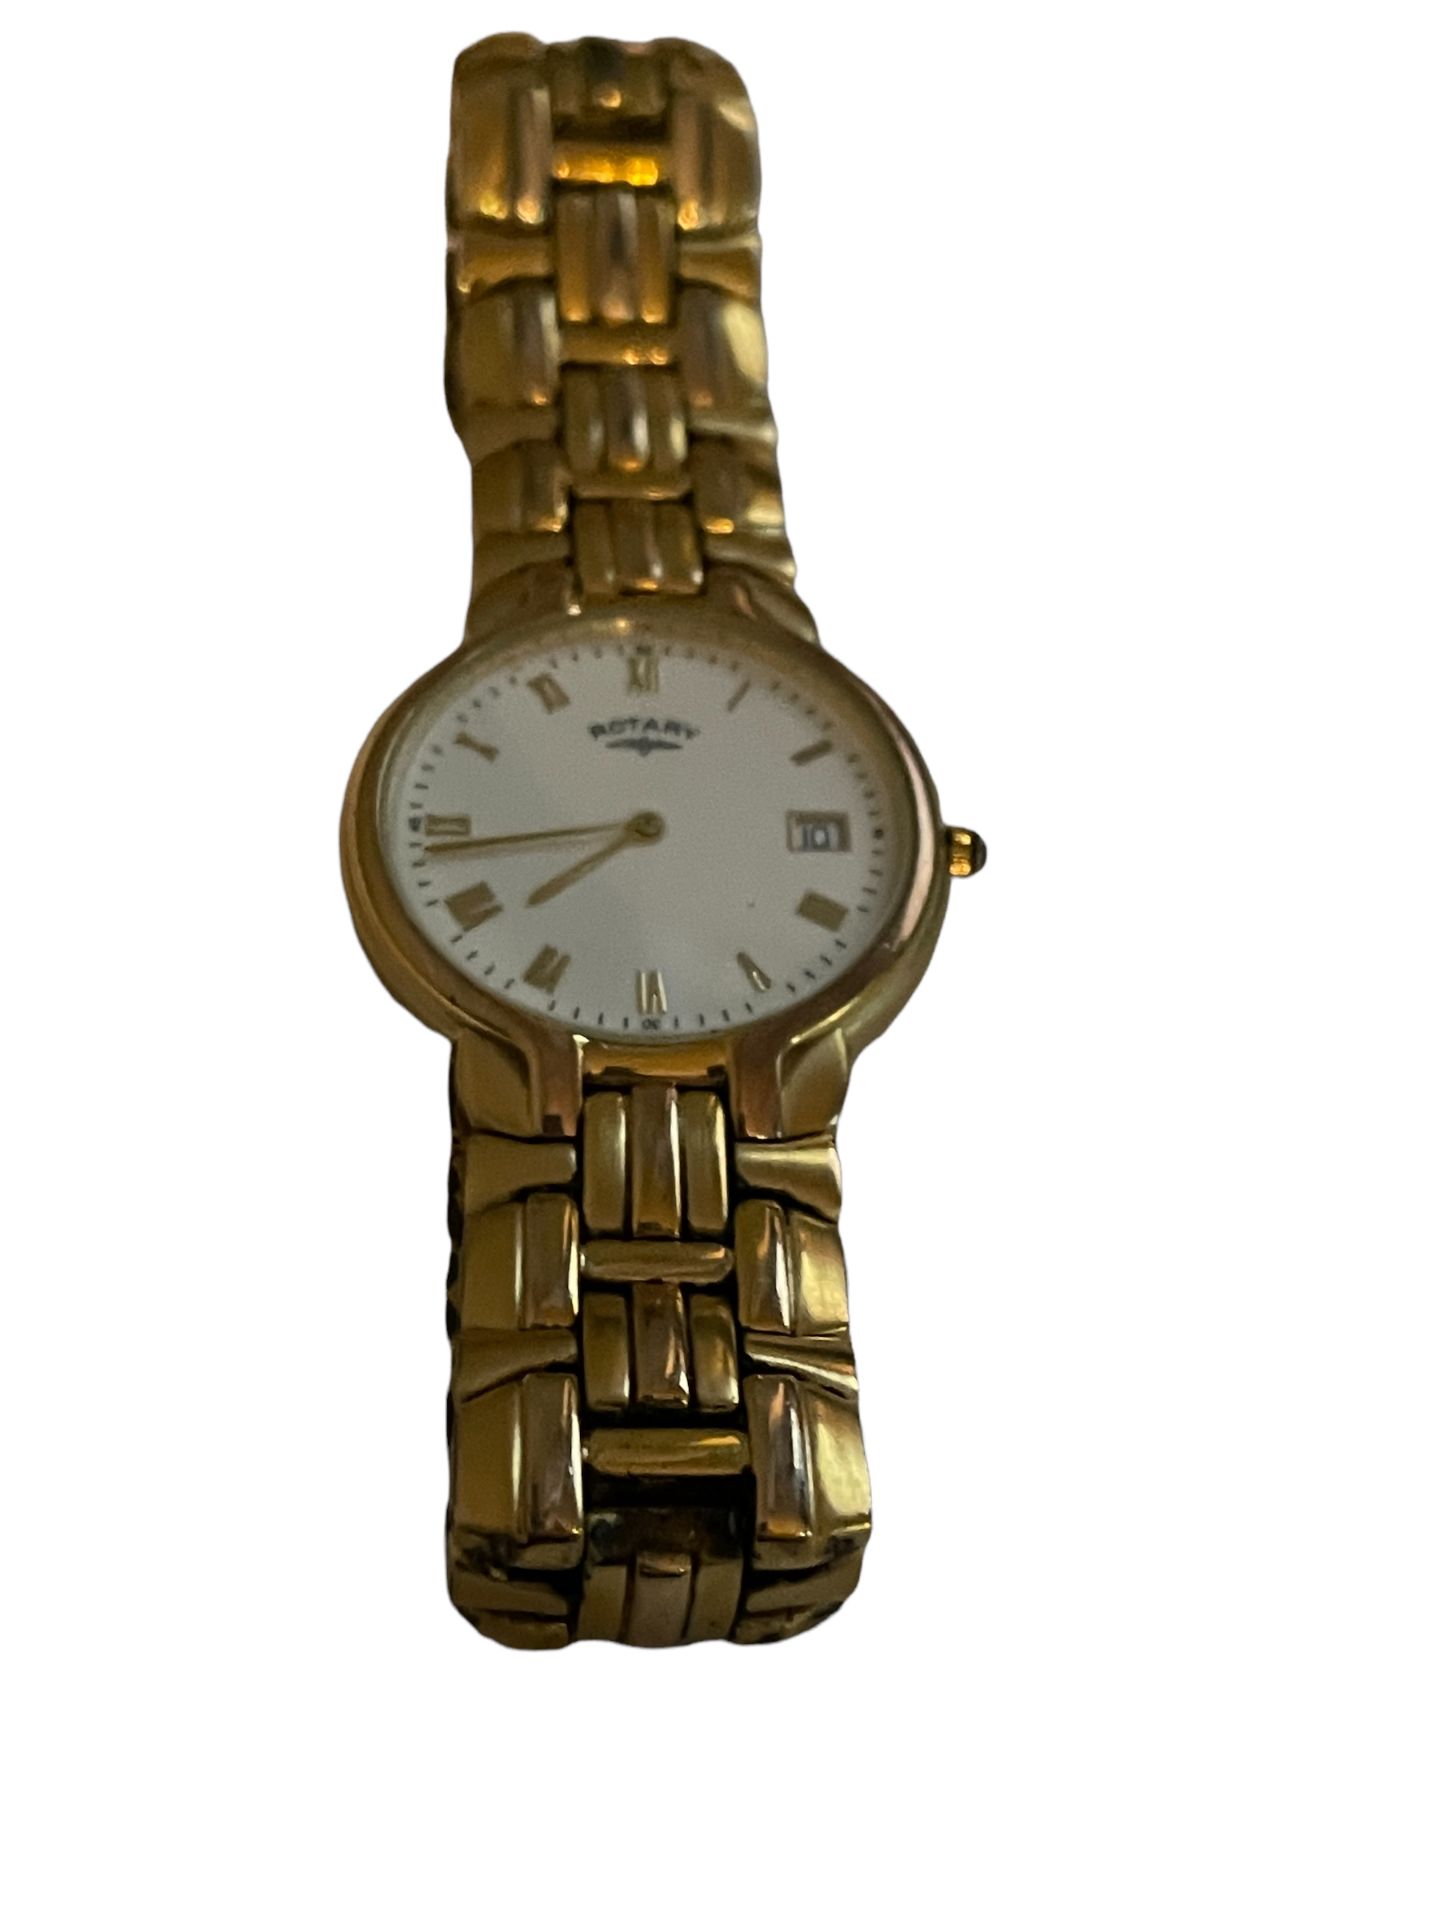 Mens Rotary Gold Plated Watch - Return Stock from our Private Jet Charter - Image 11 of 14